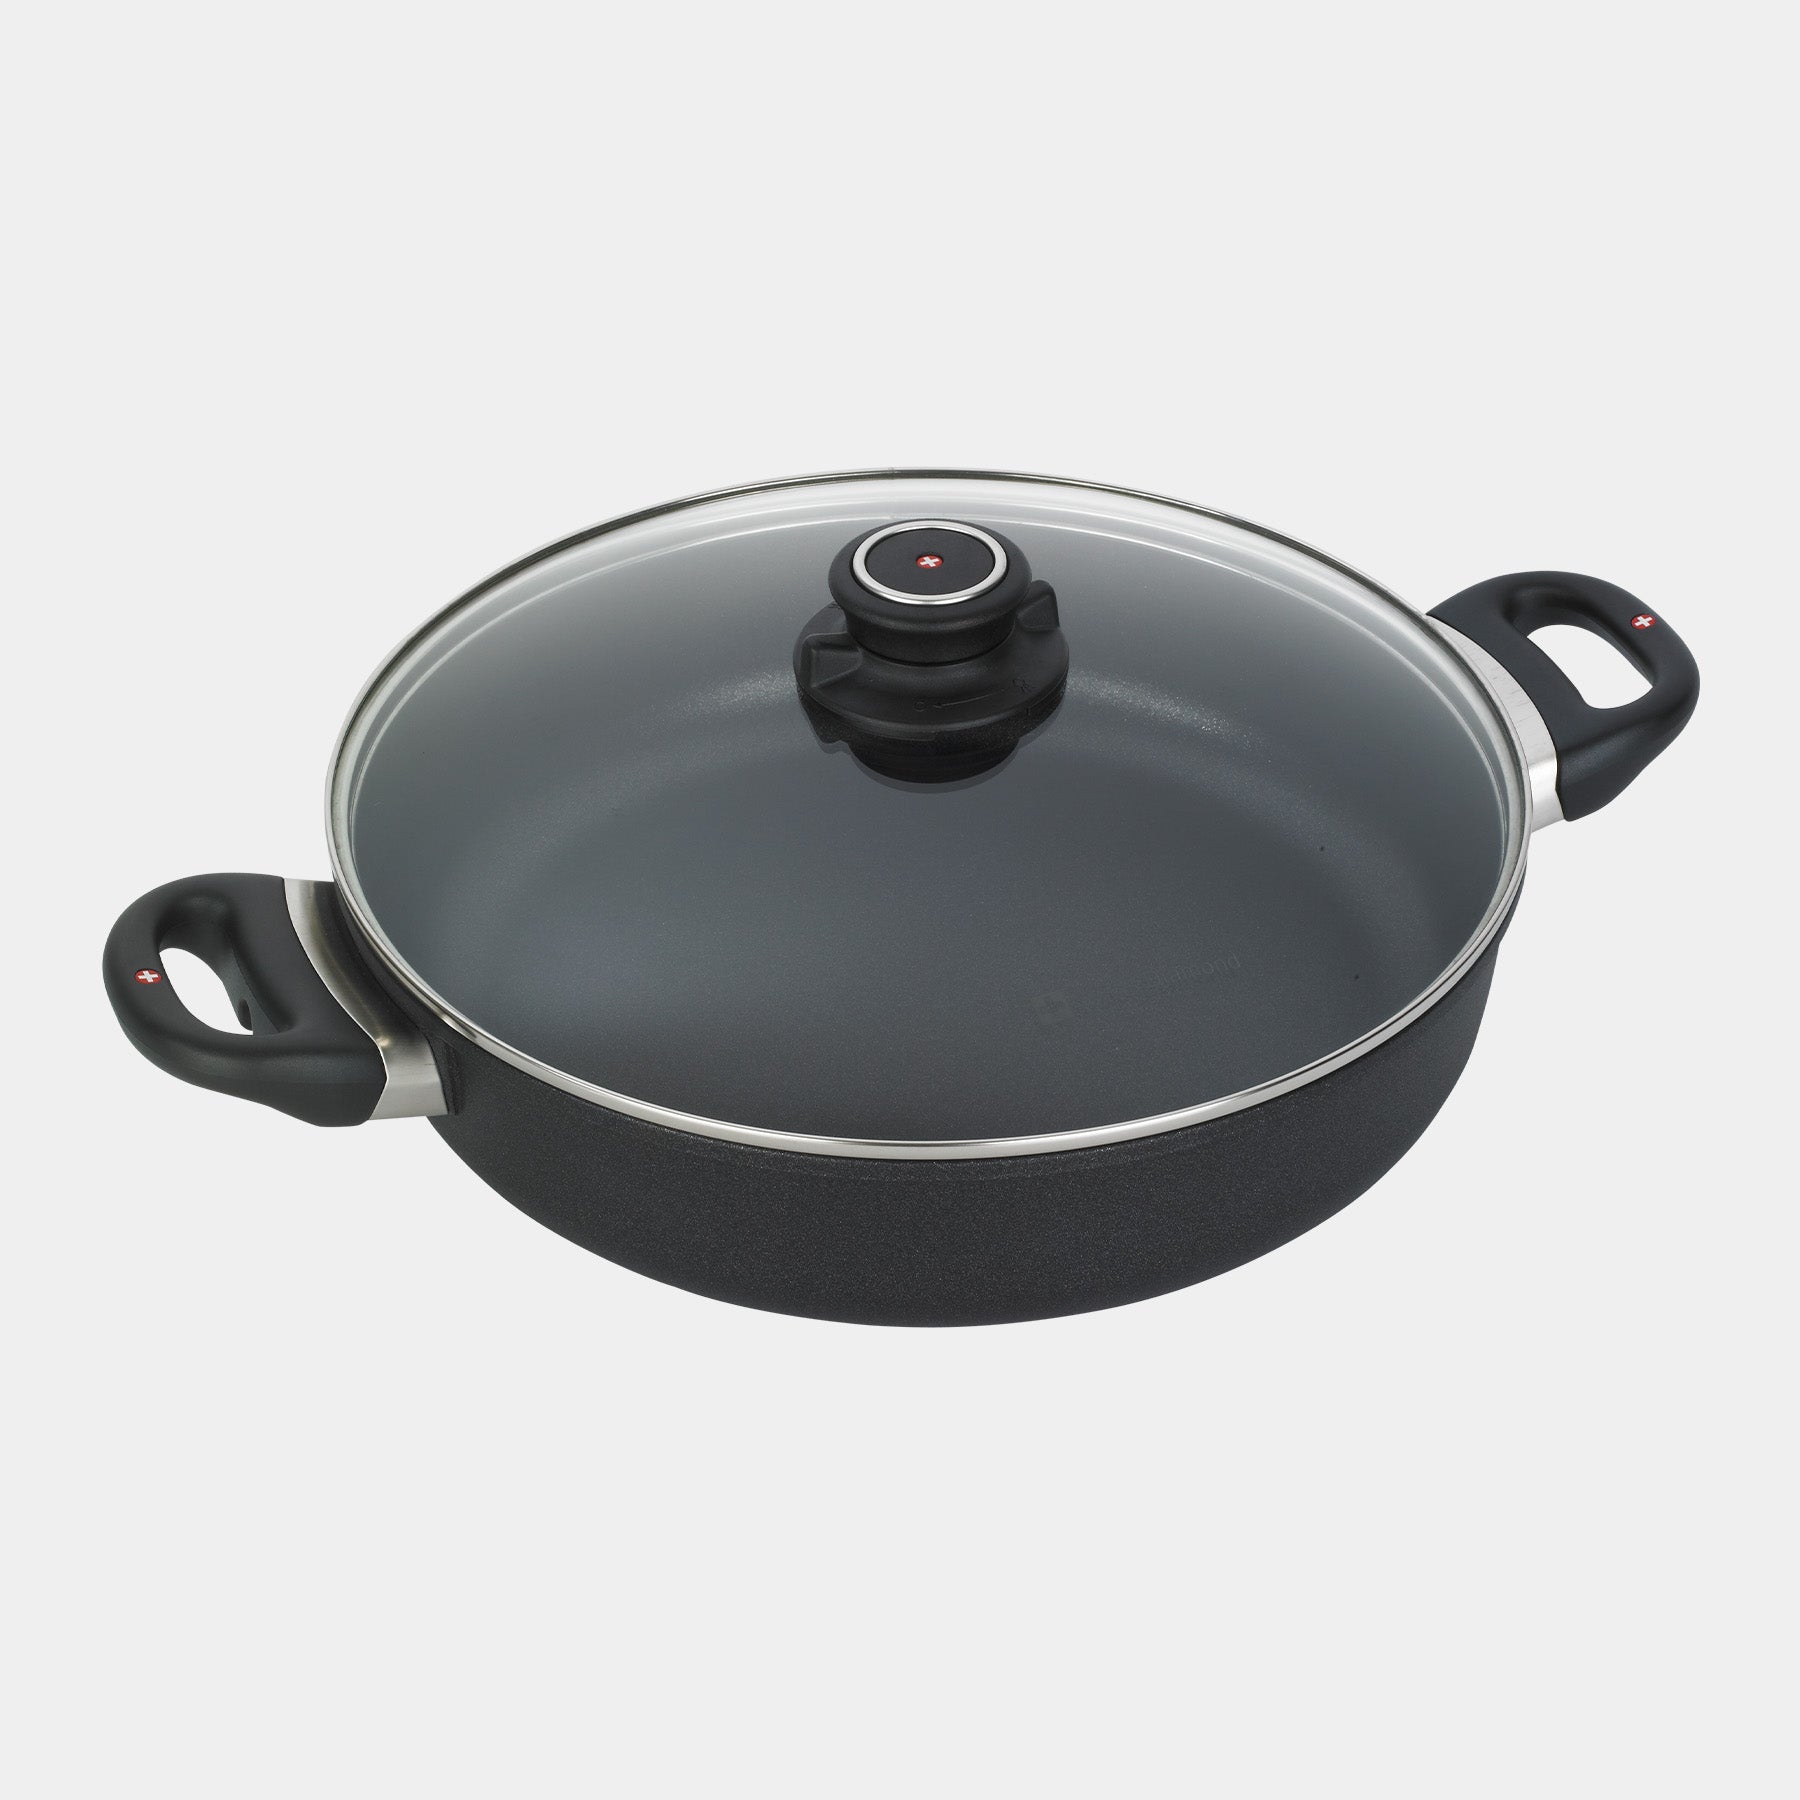 XD 11" Nonstick Sauteuse with Glass Lid - Induction